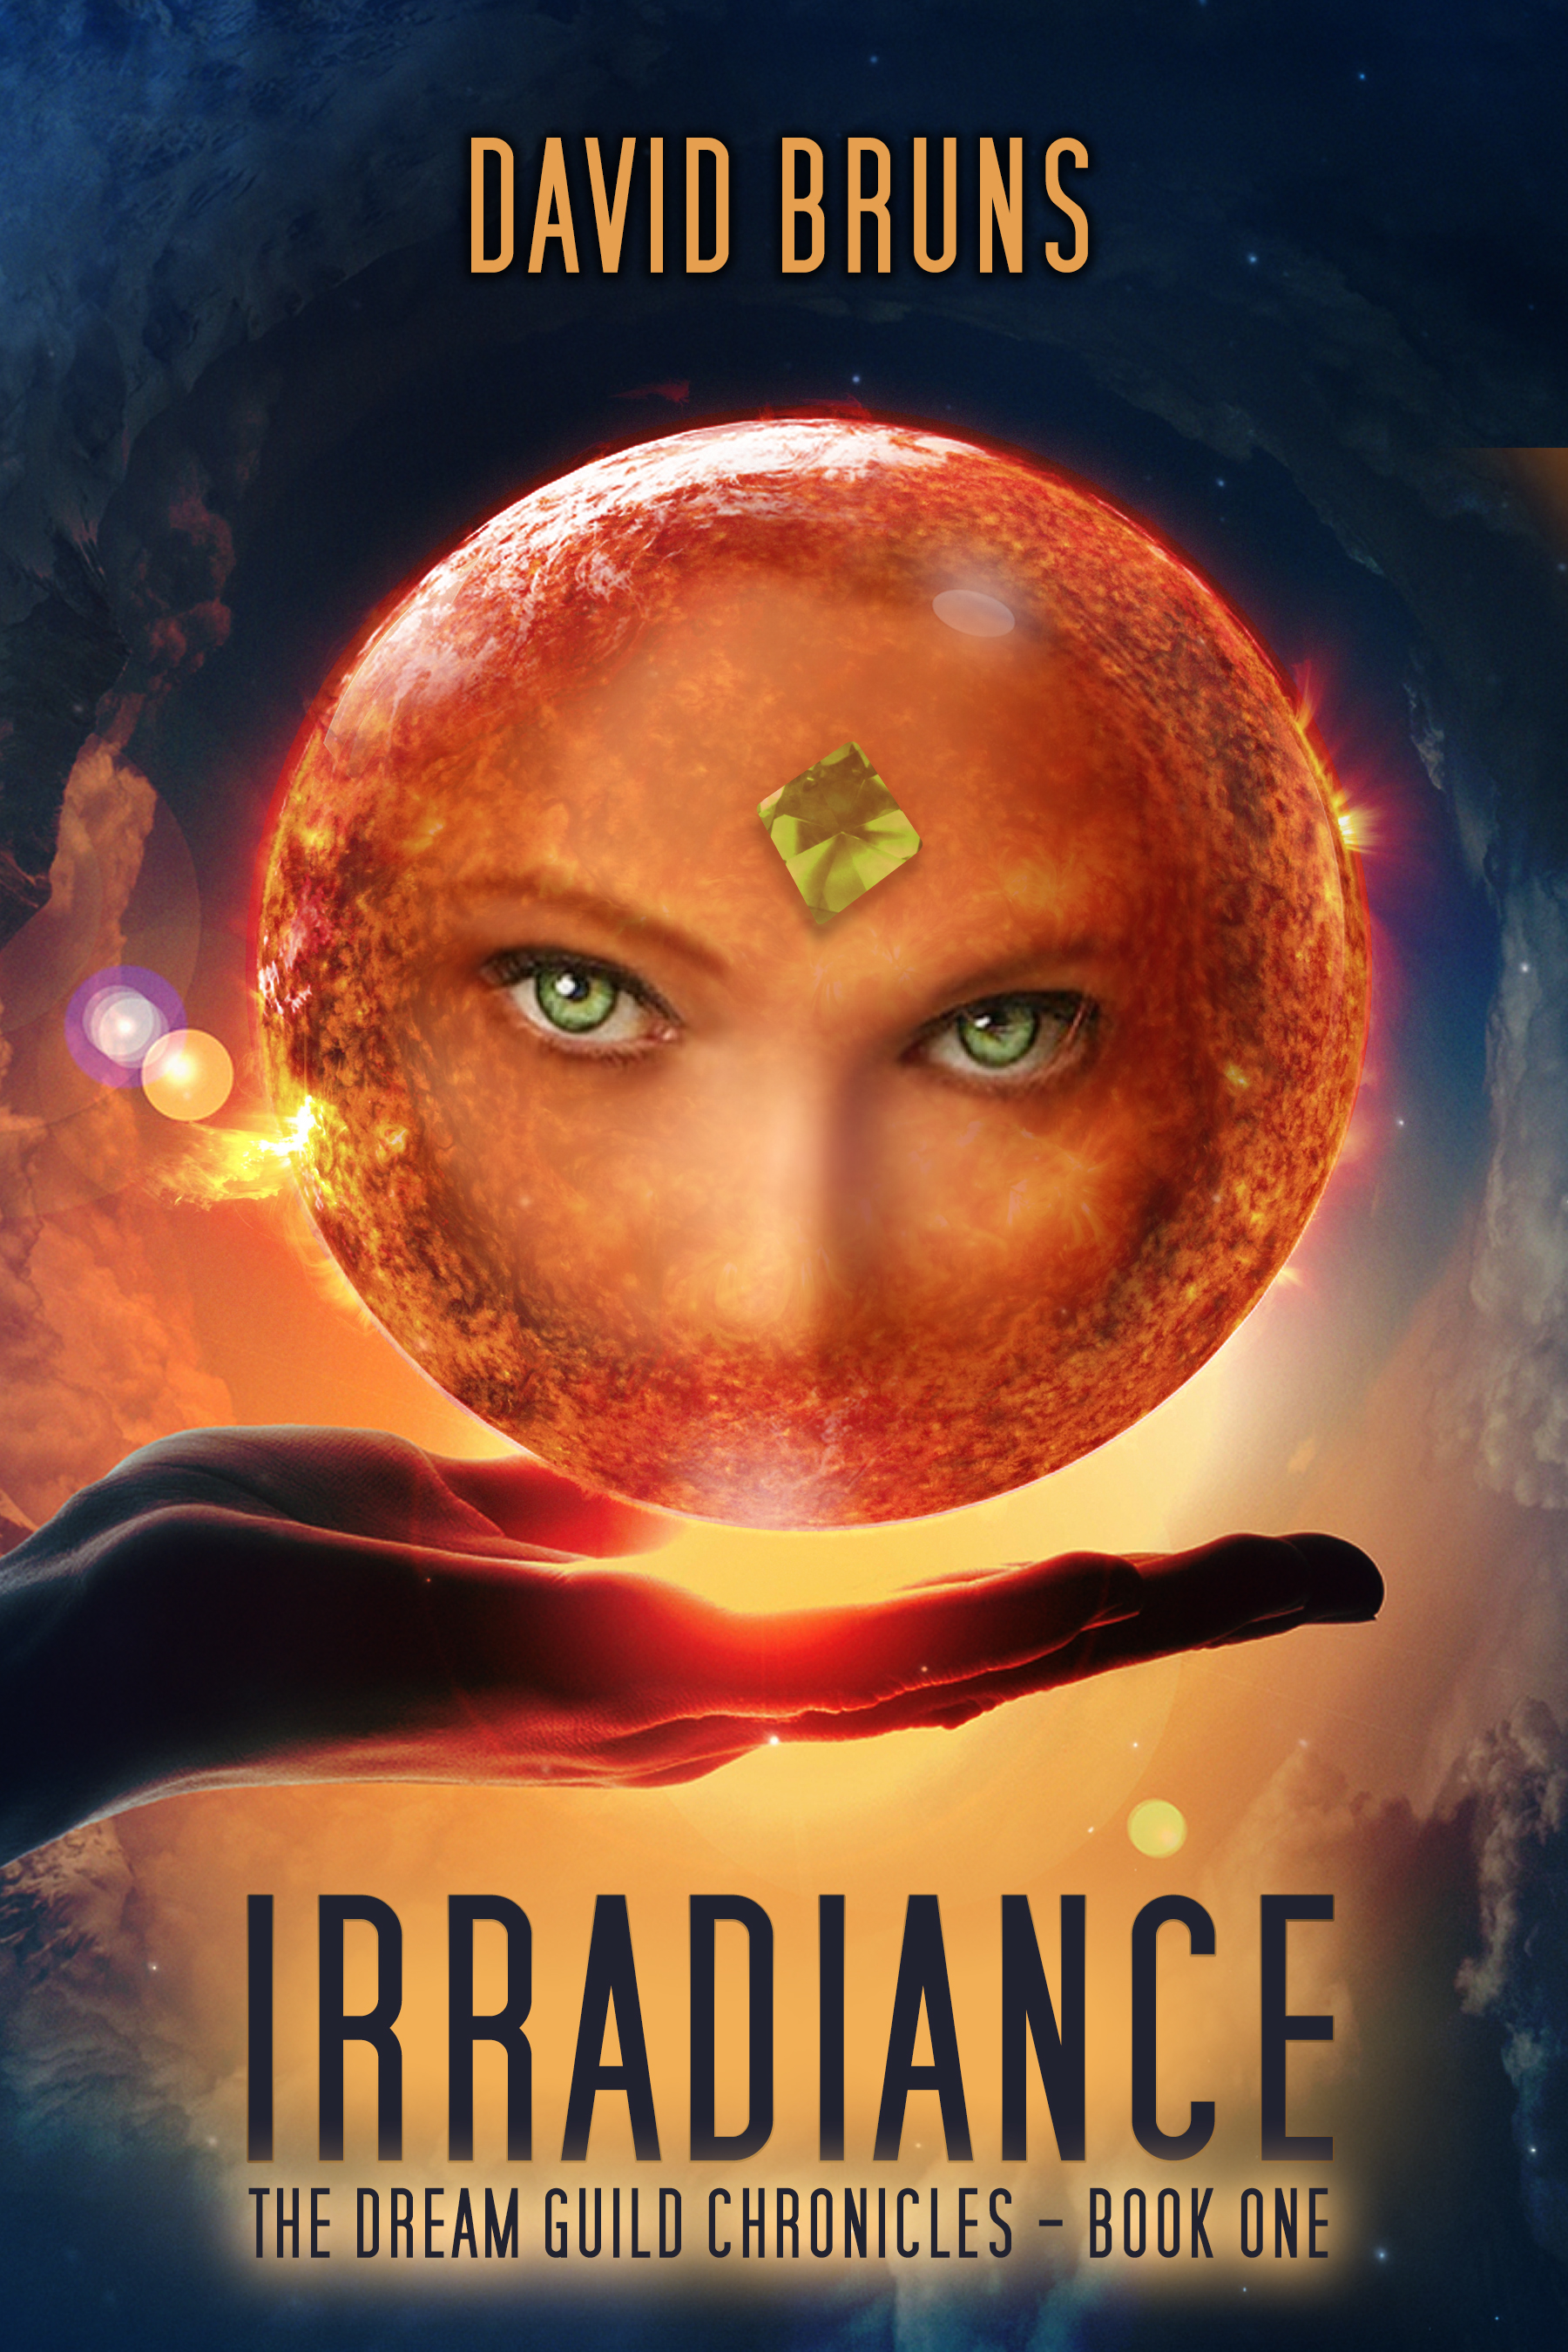 Irradiance: The Dream Guild Chronicles